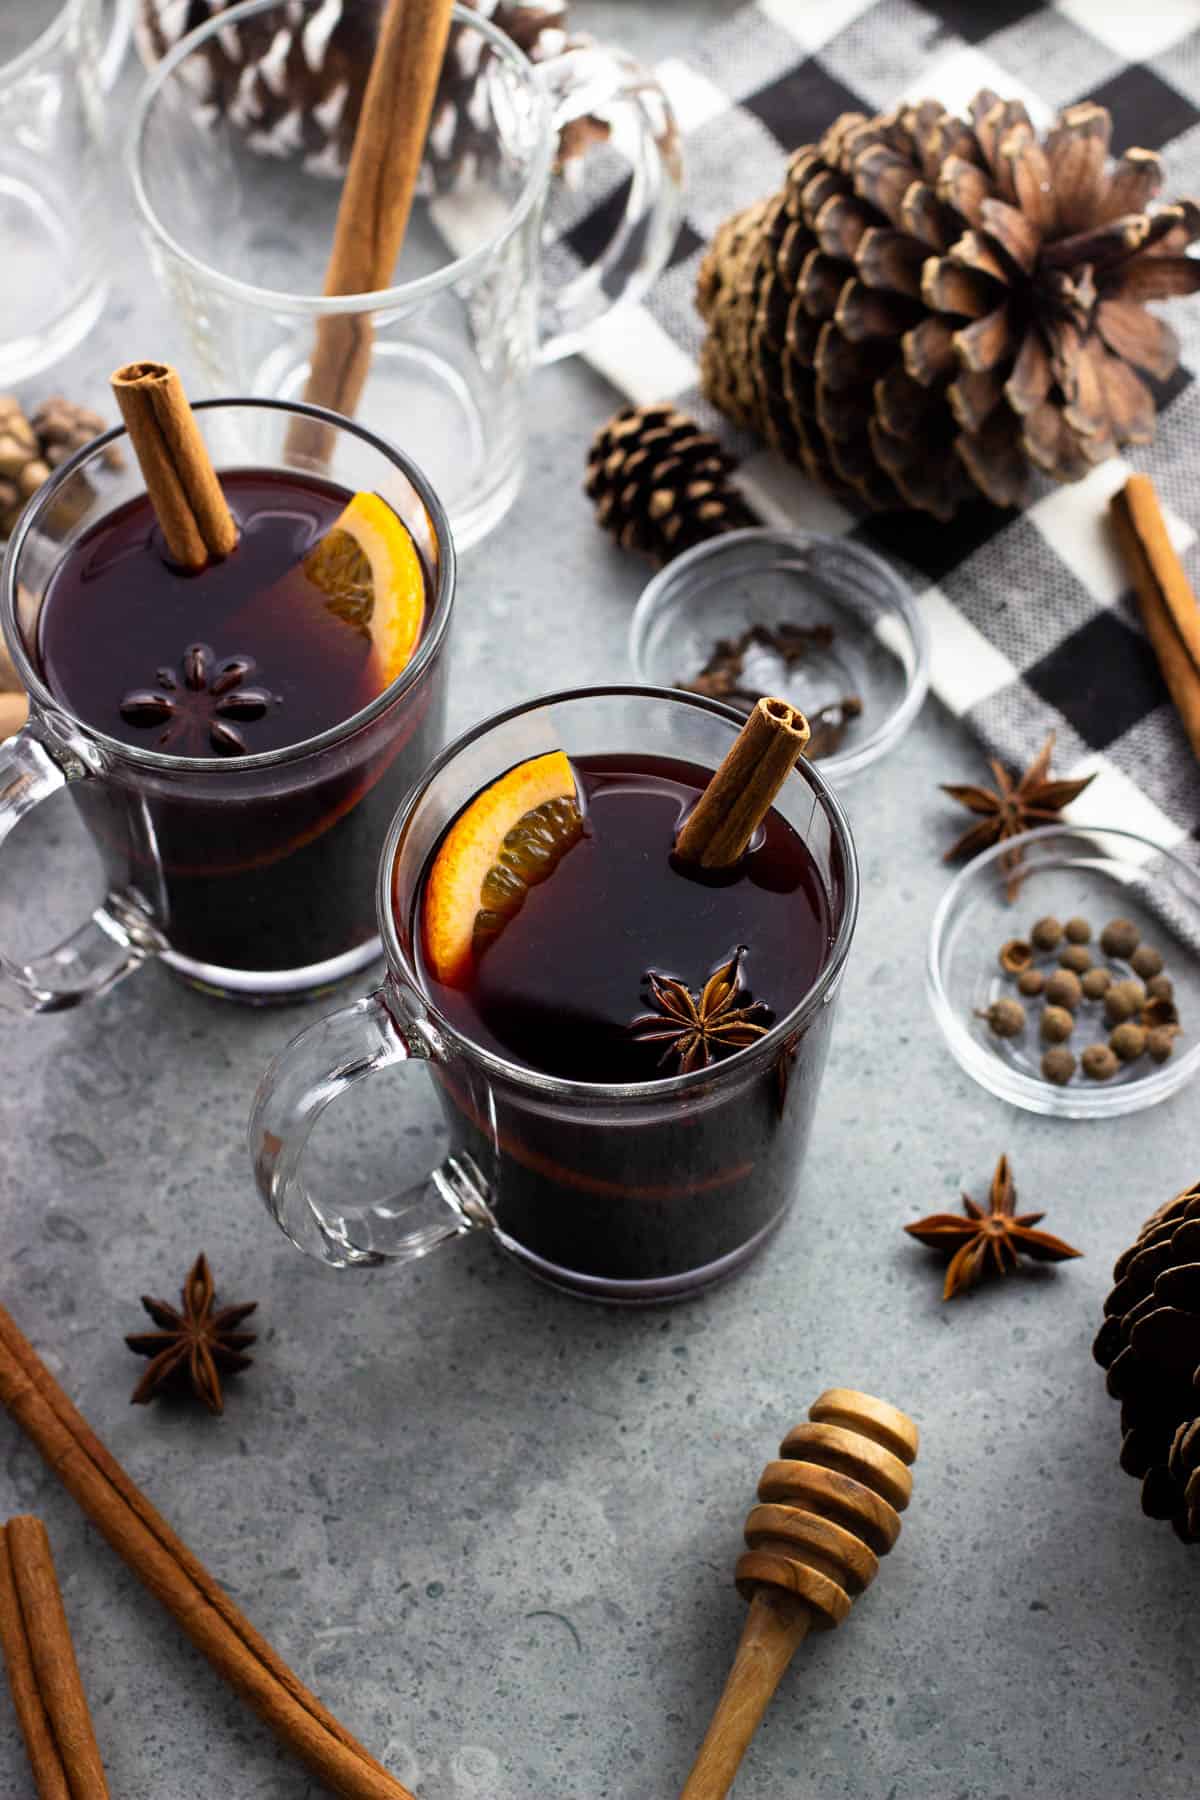 Glass mugs filled with vin brulé.